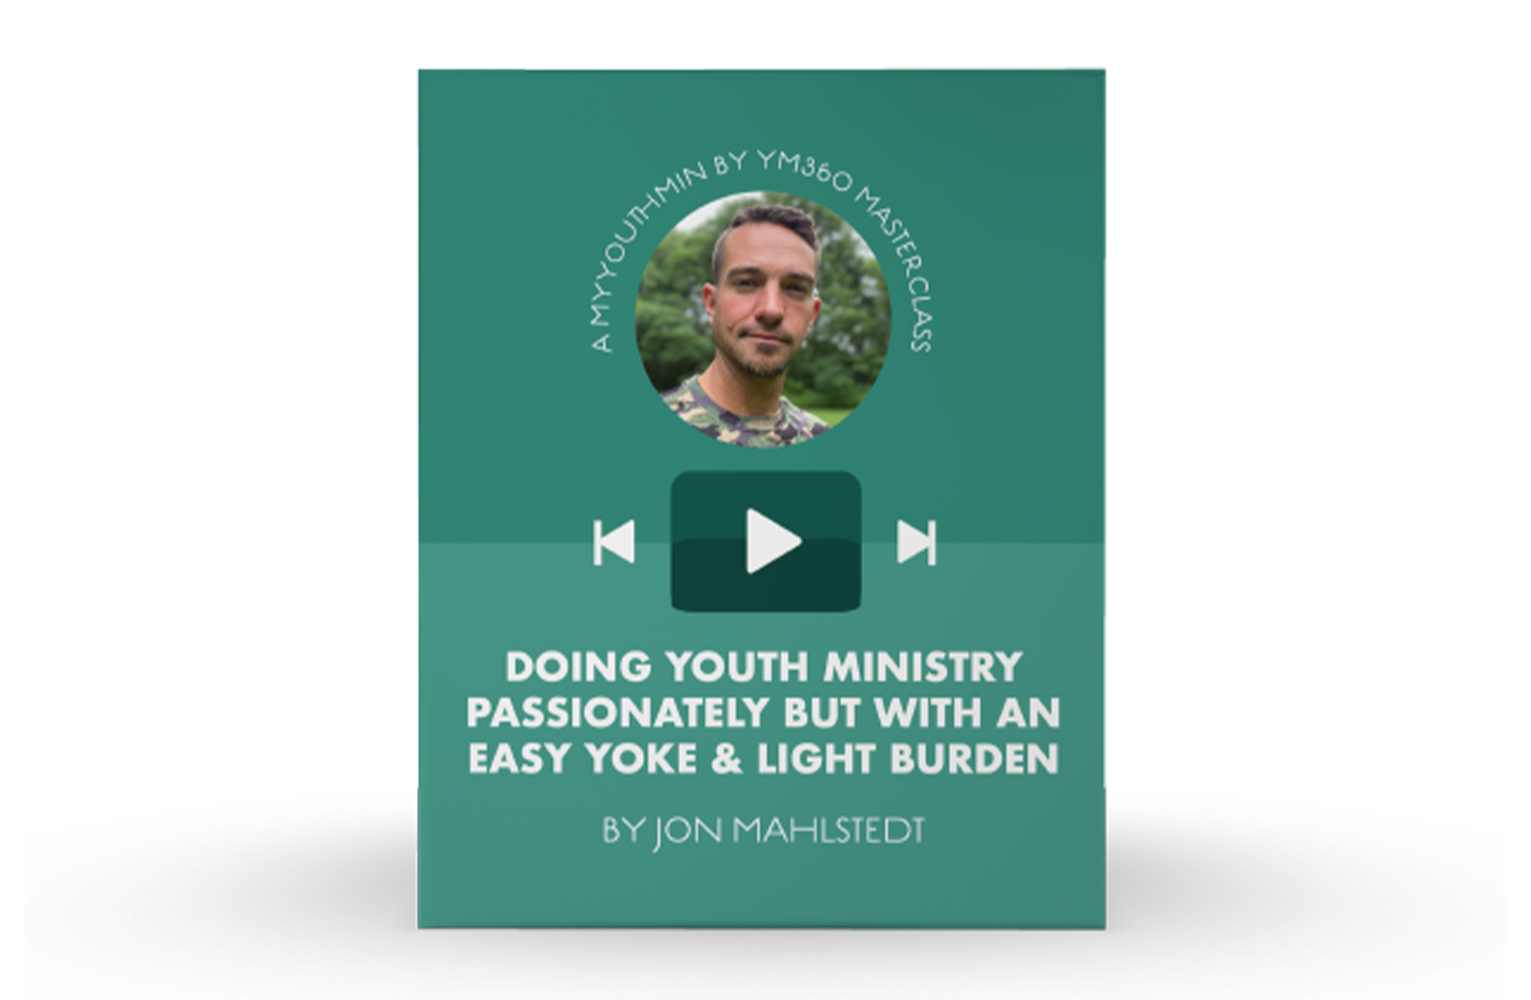 [Video Training] Doing Youth Ministry Passionately But With An Easy Yoke & Light Burden